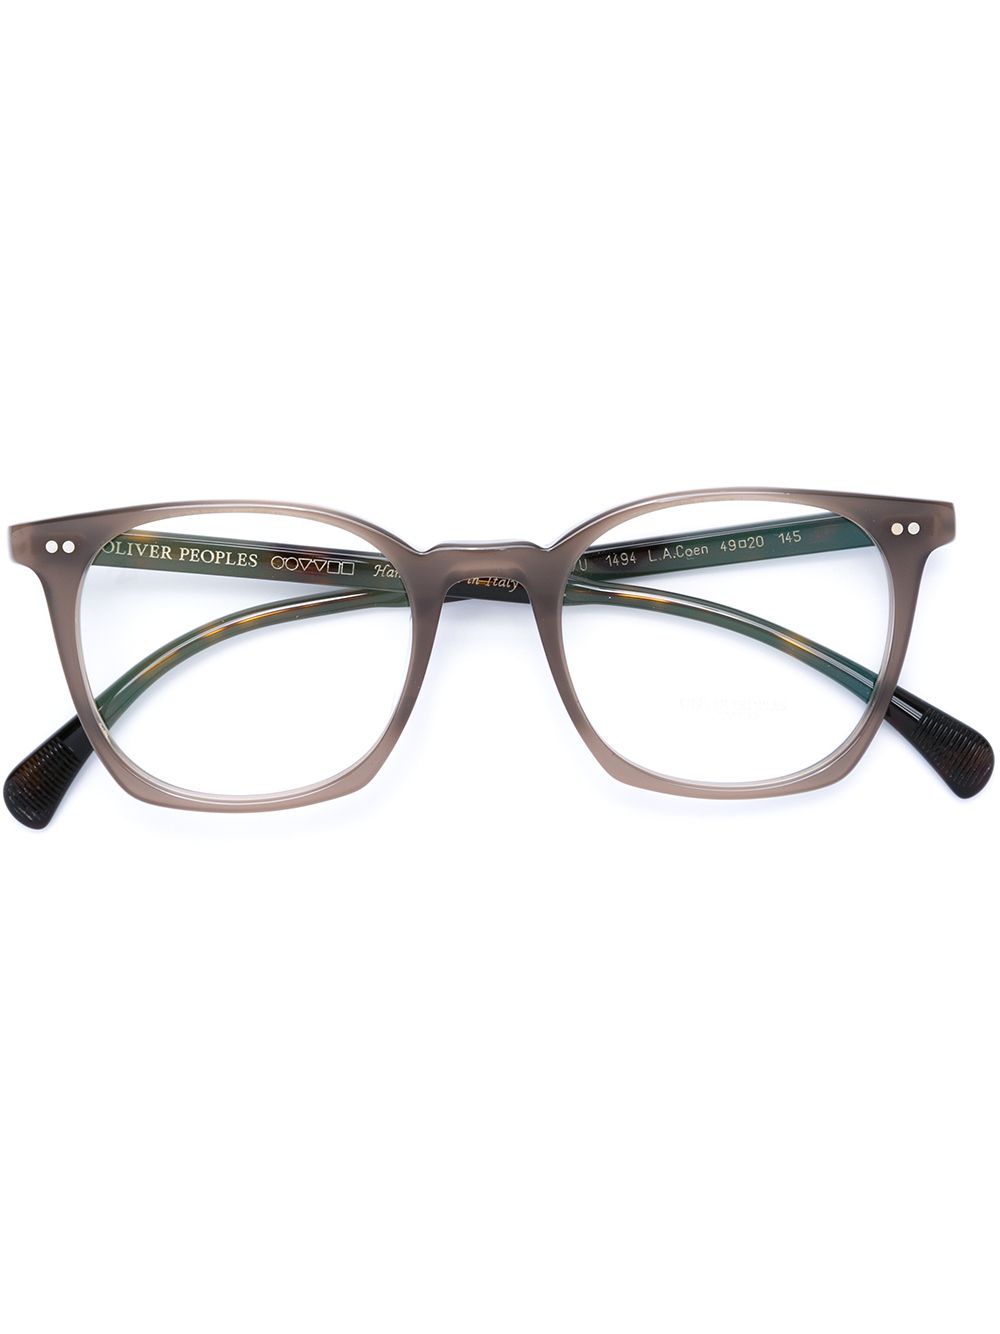 Oliver Peoples ' Coen' Glasses - Farfetch